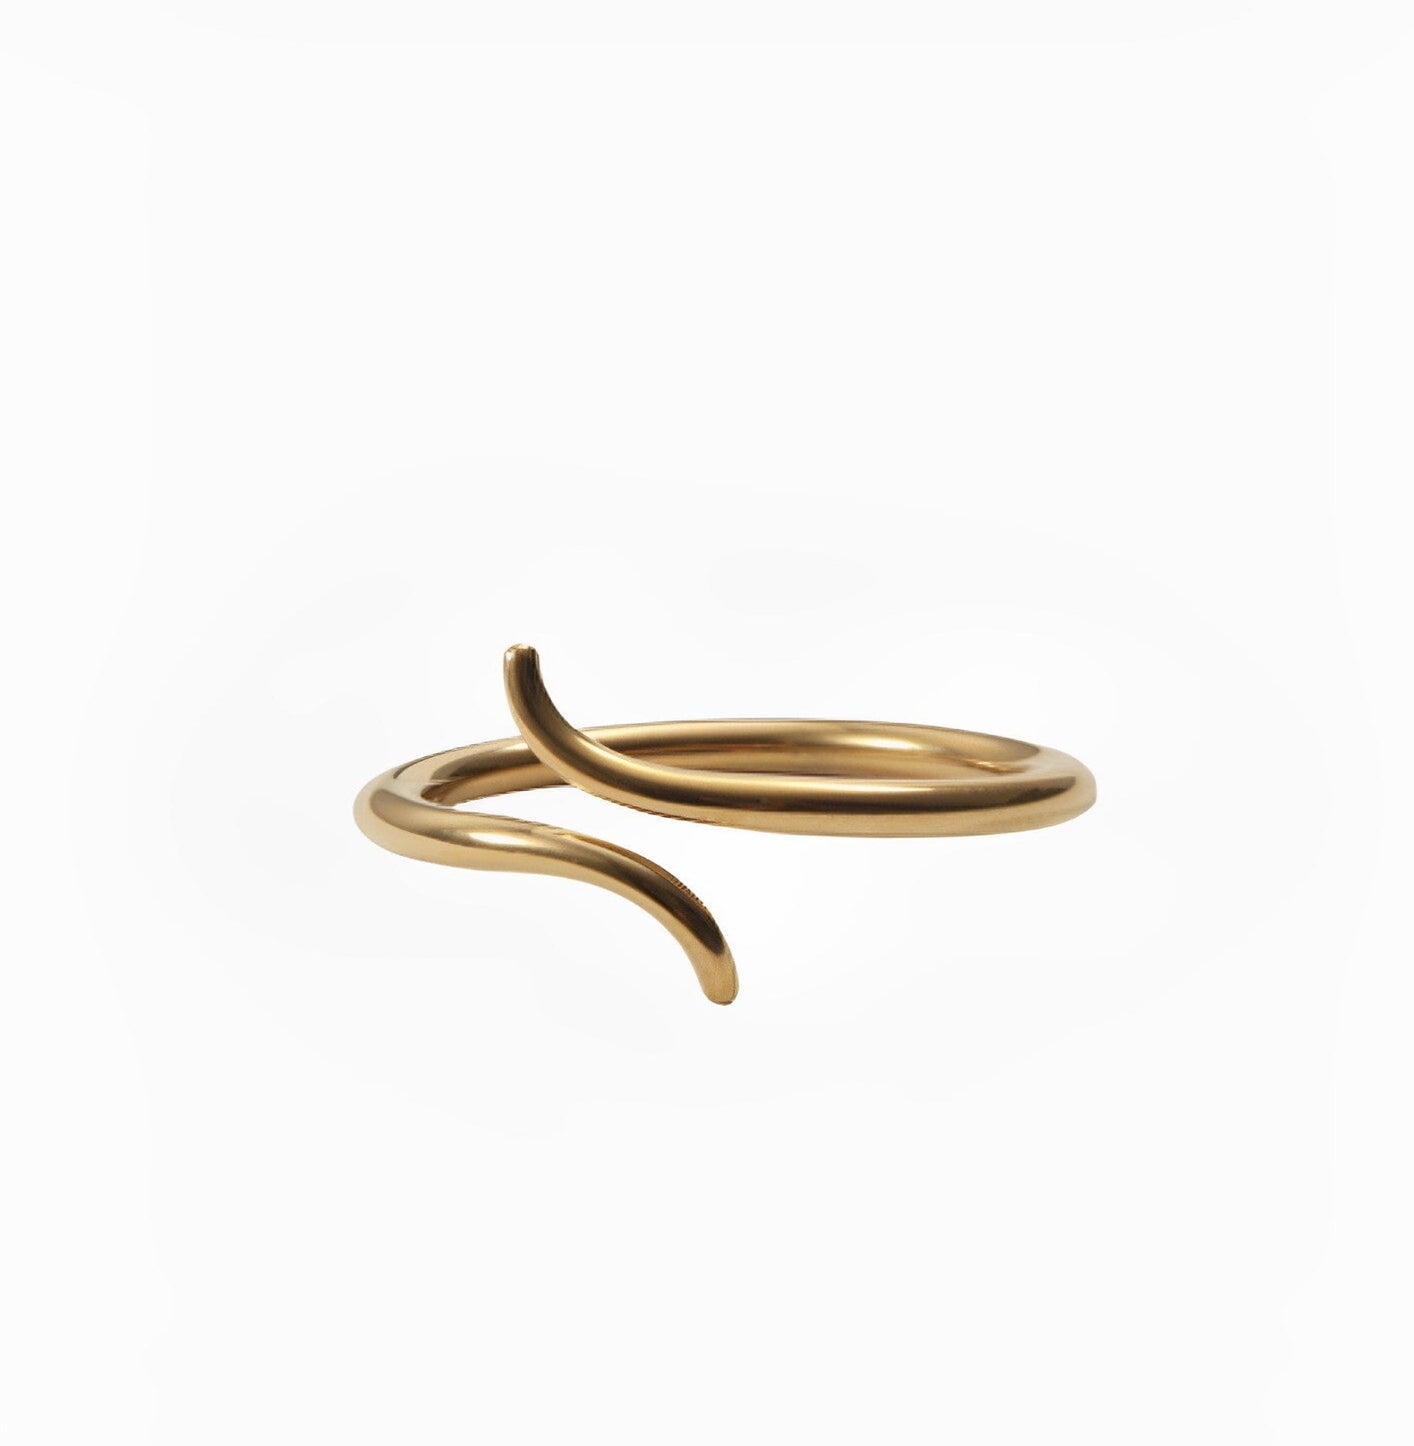 SNAKE RING ring Yubama Jewelry Online Store - The Elegant Designs of Gold and Silver ! 